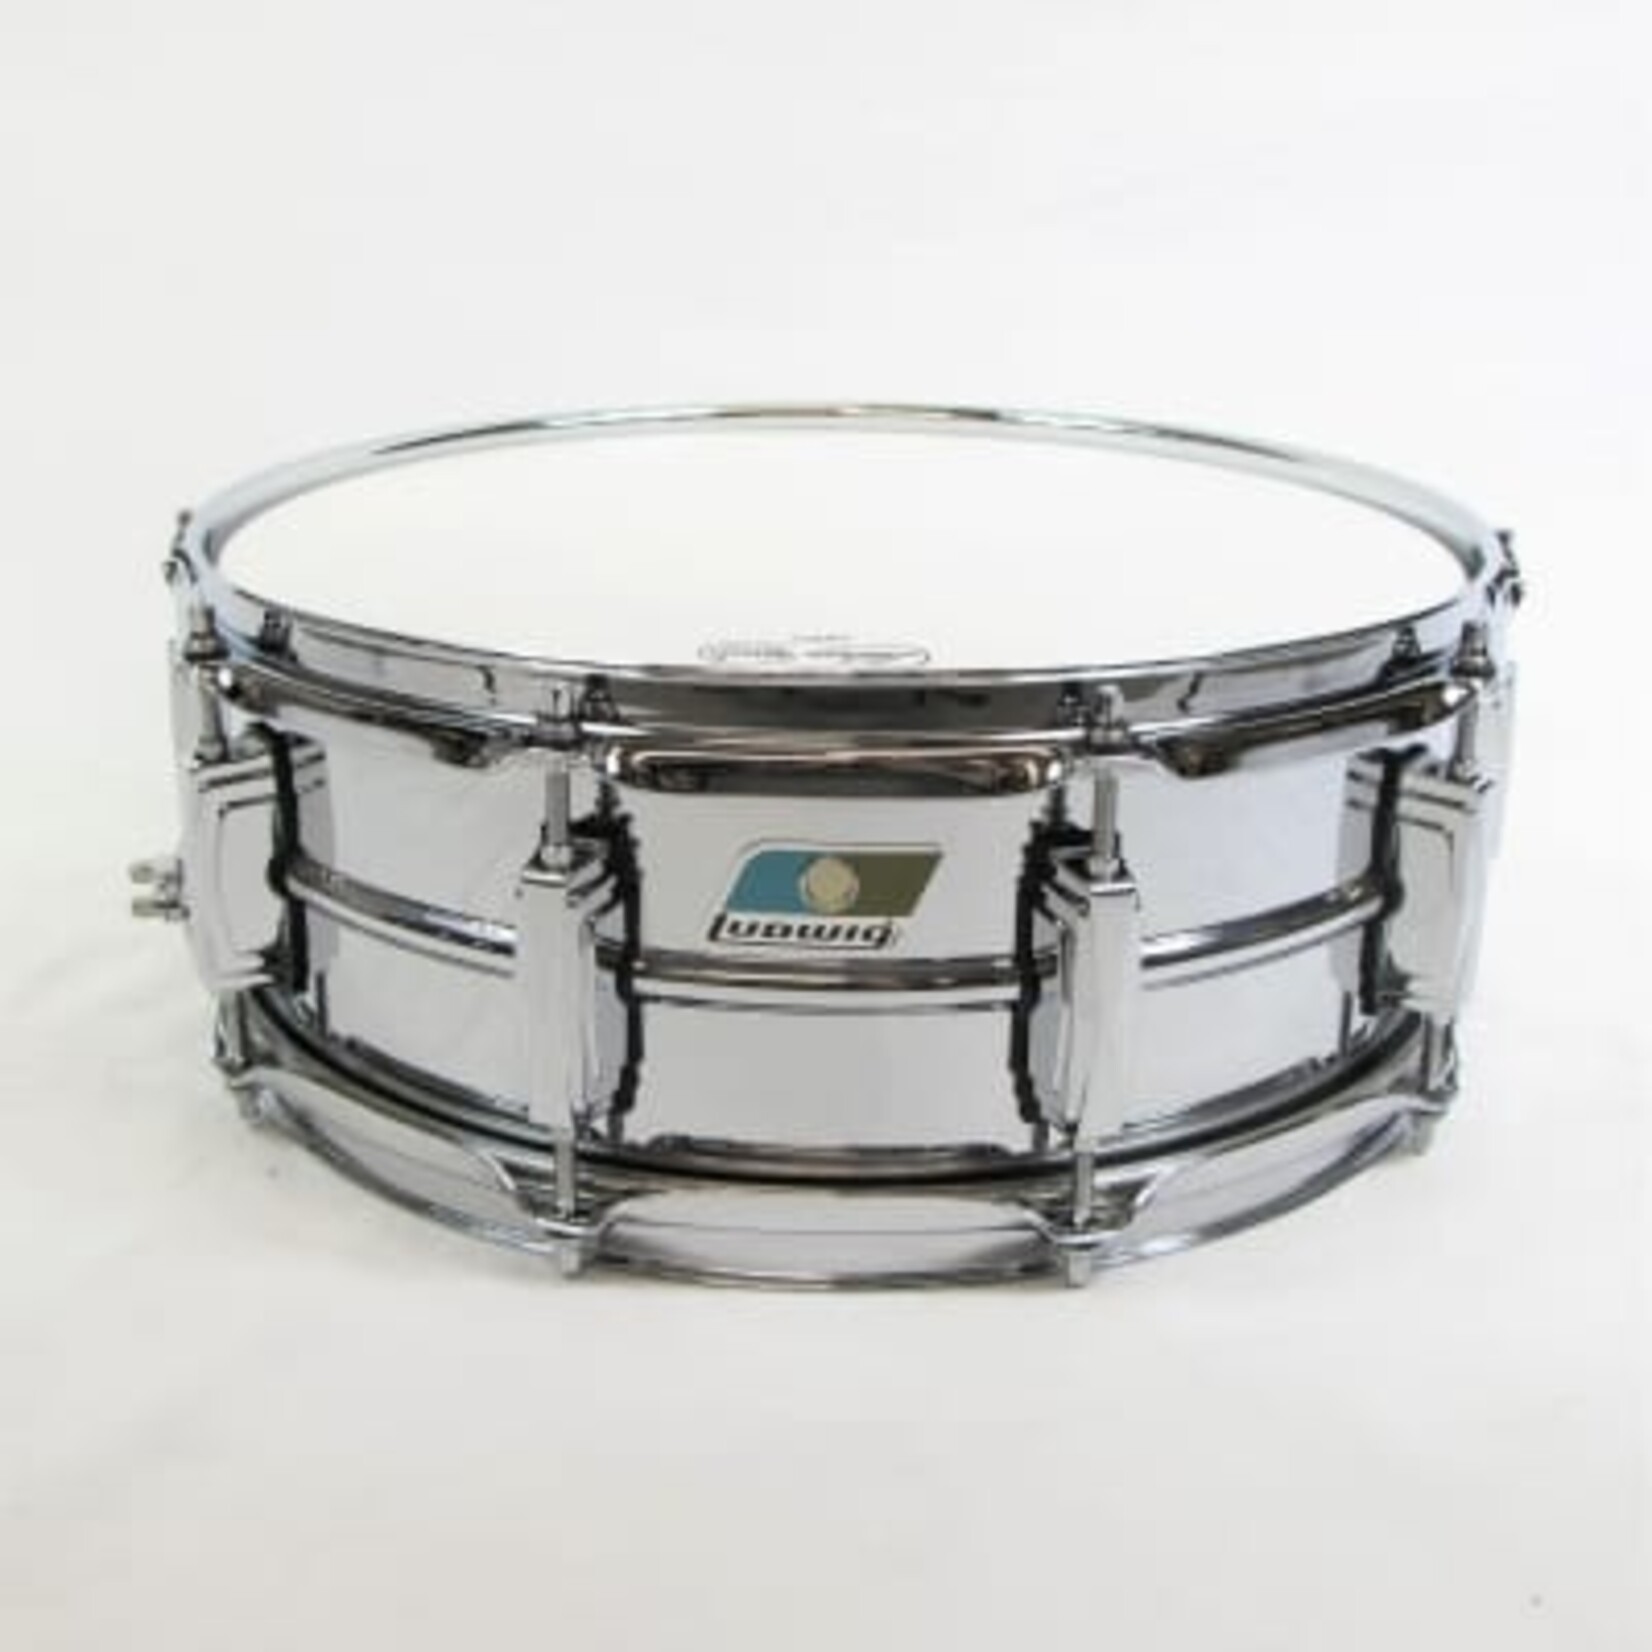 Ludwig B-STOCK Ludwig 5X14 Supraphonic Snare Drum / Imperial Lugs / Smooth Shell